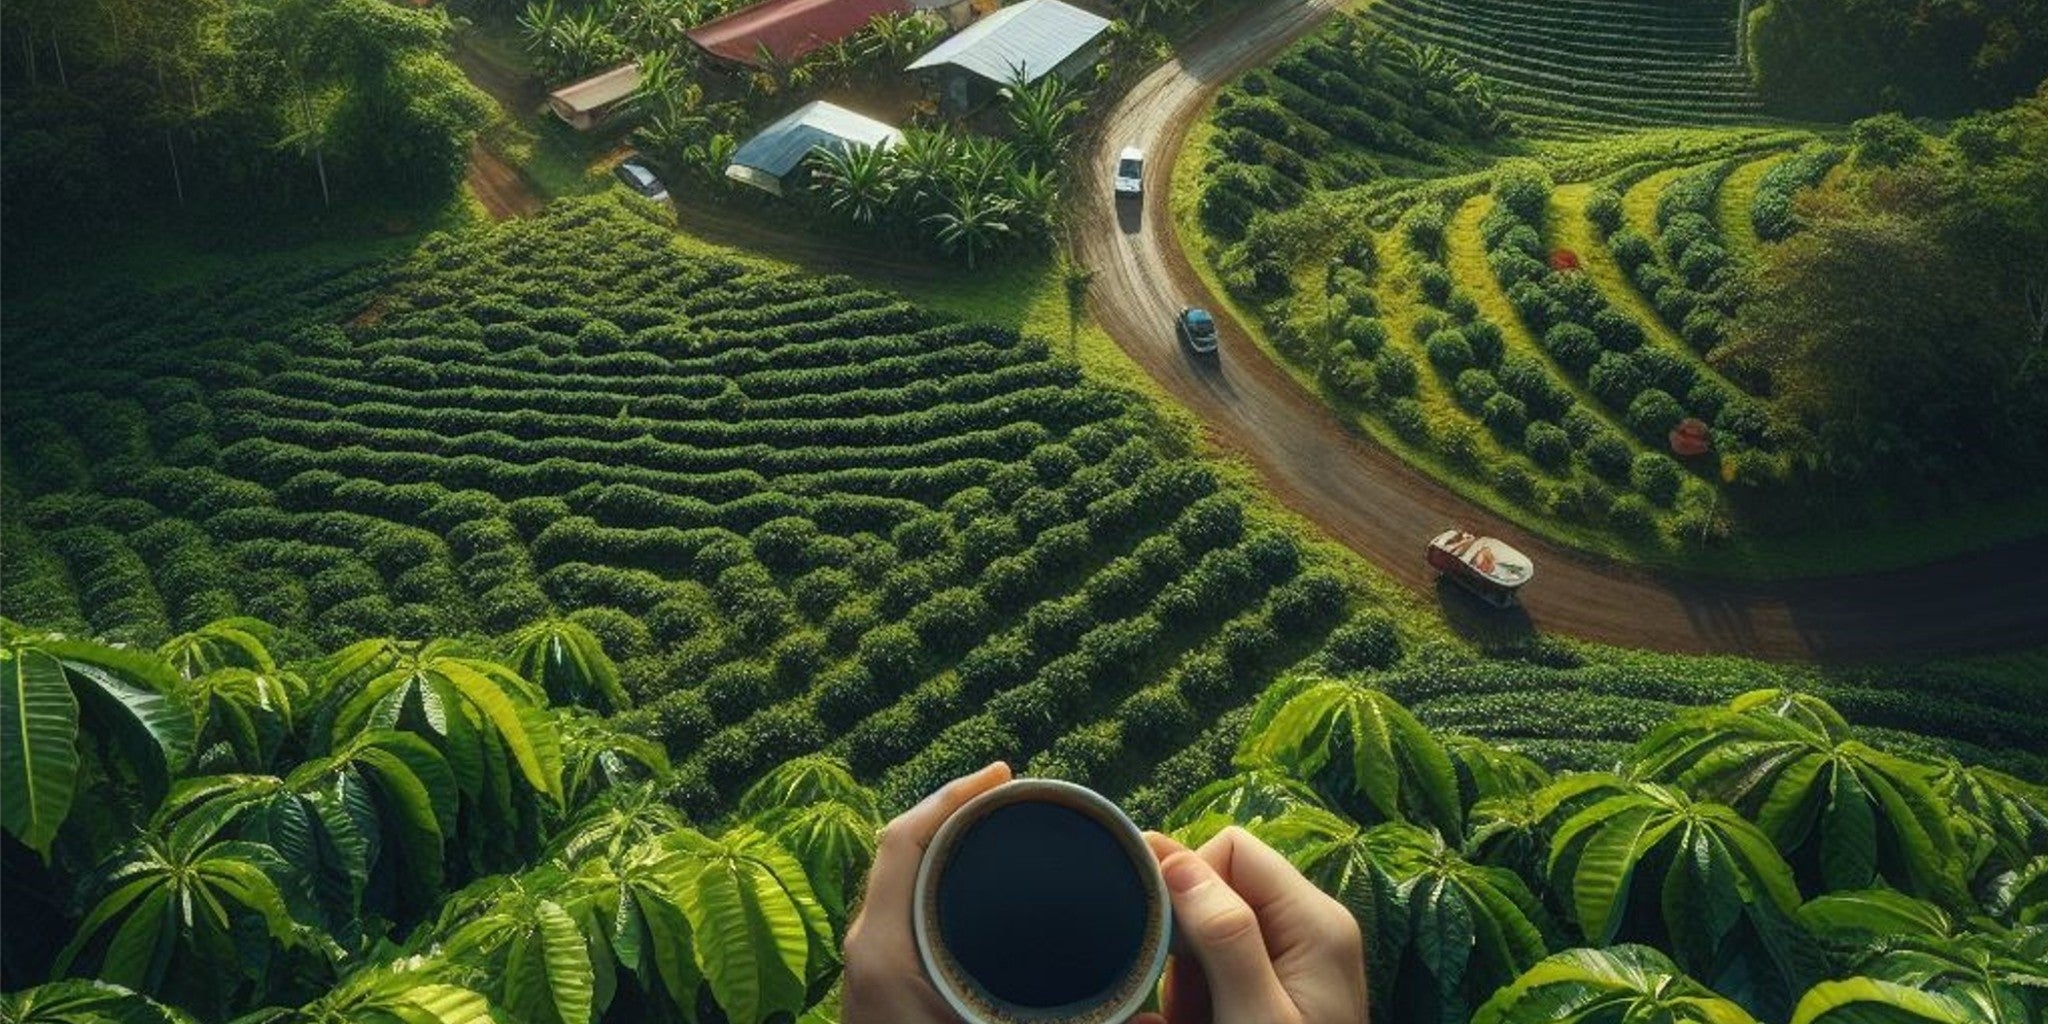 Carlini Coffee offers a delicious tasting Costa Rica coffee for delivery to your door.